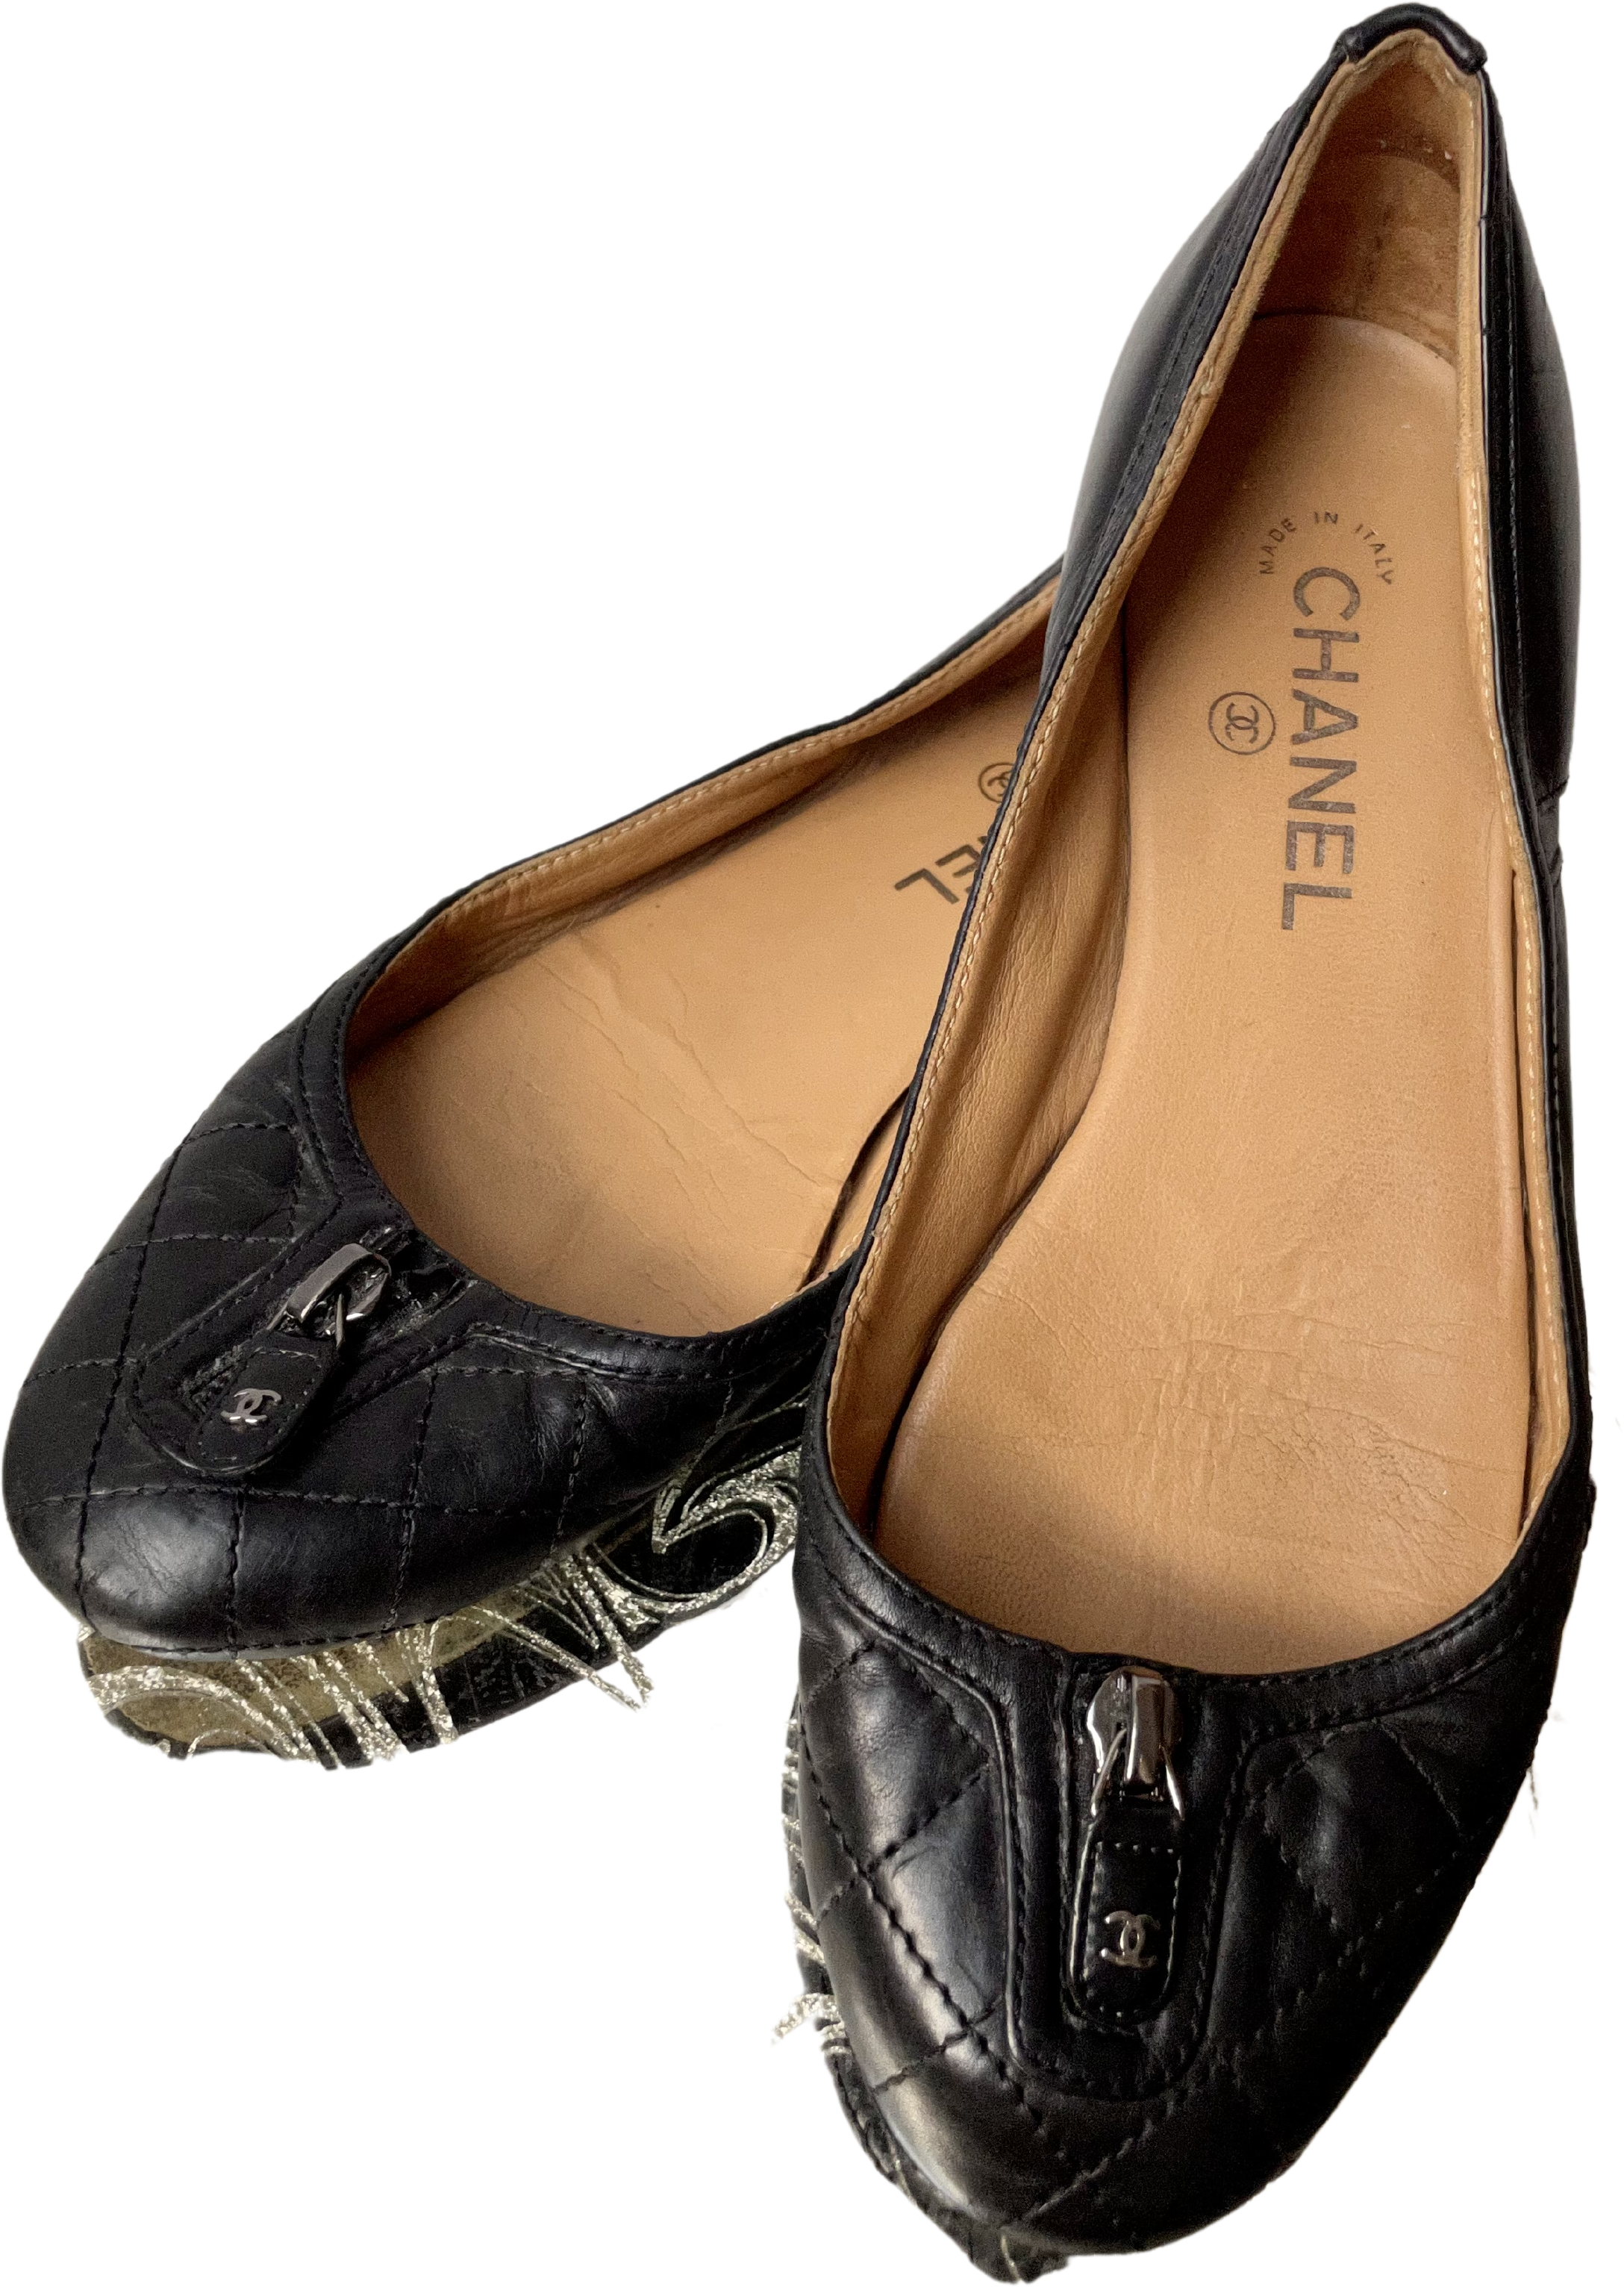 90s/00s Black Leather Quilted Ballet Flats By Chanel